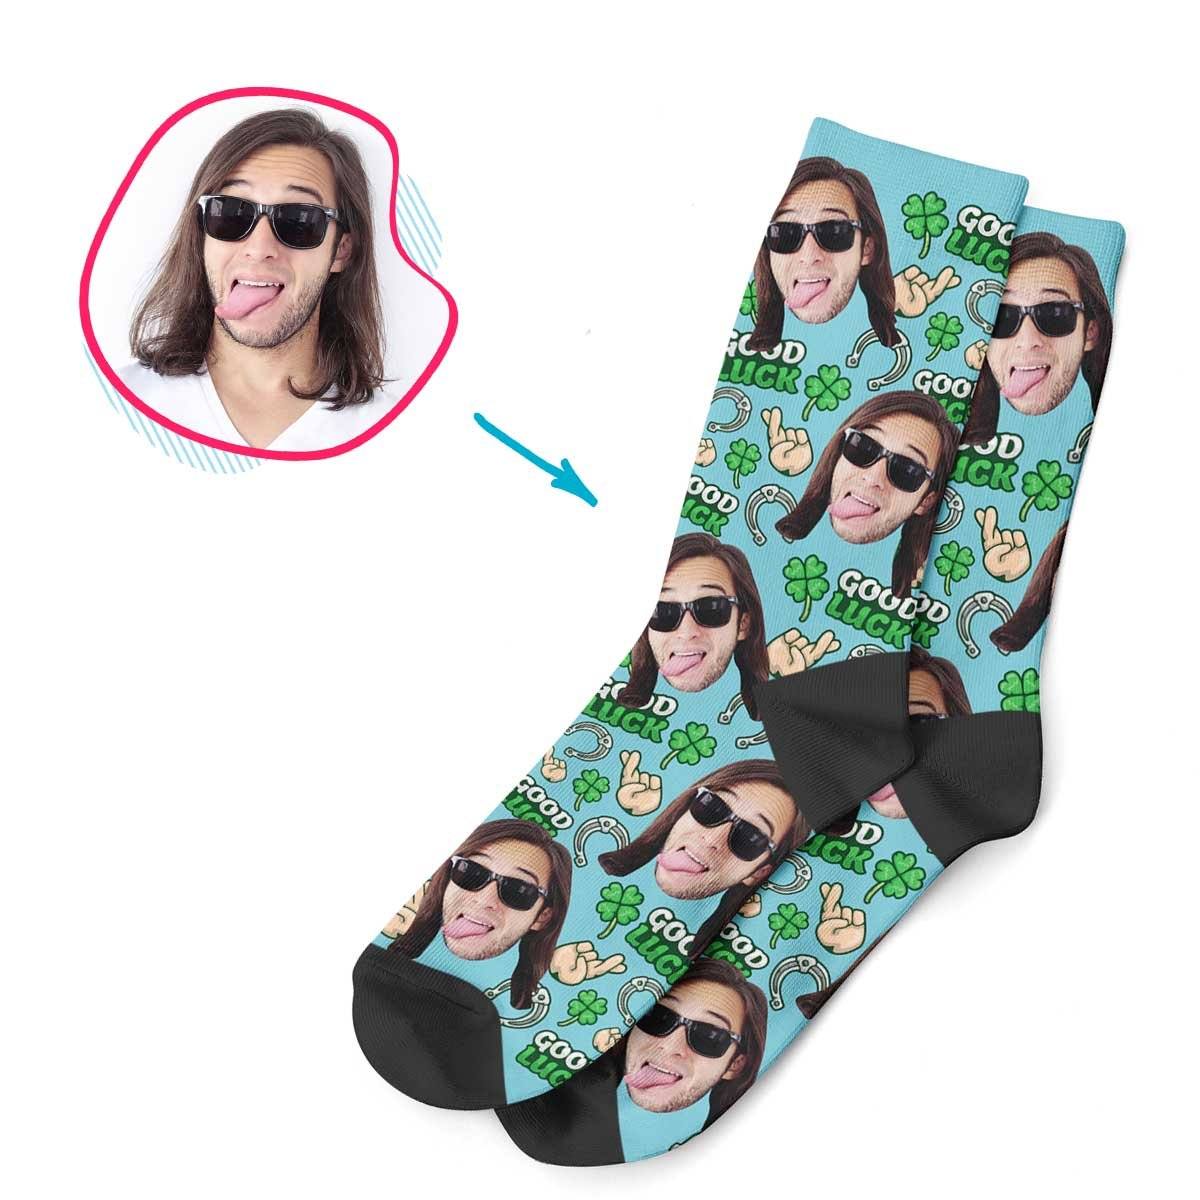 Blue Good Luck personalized socks with photo of face printed on them